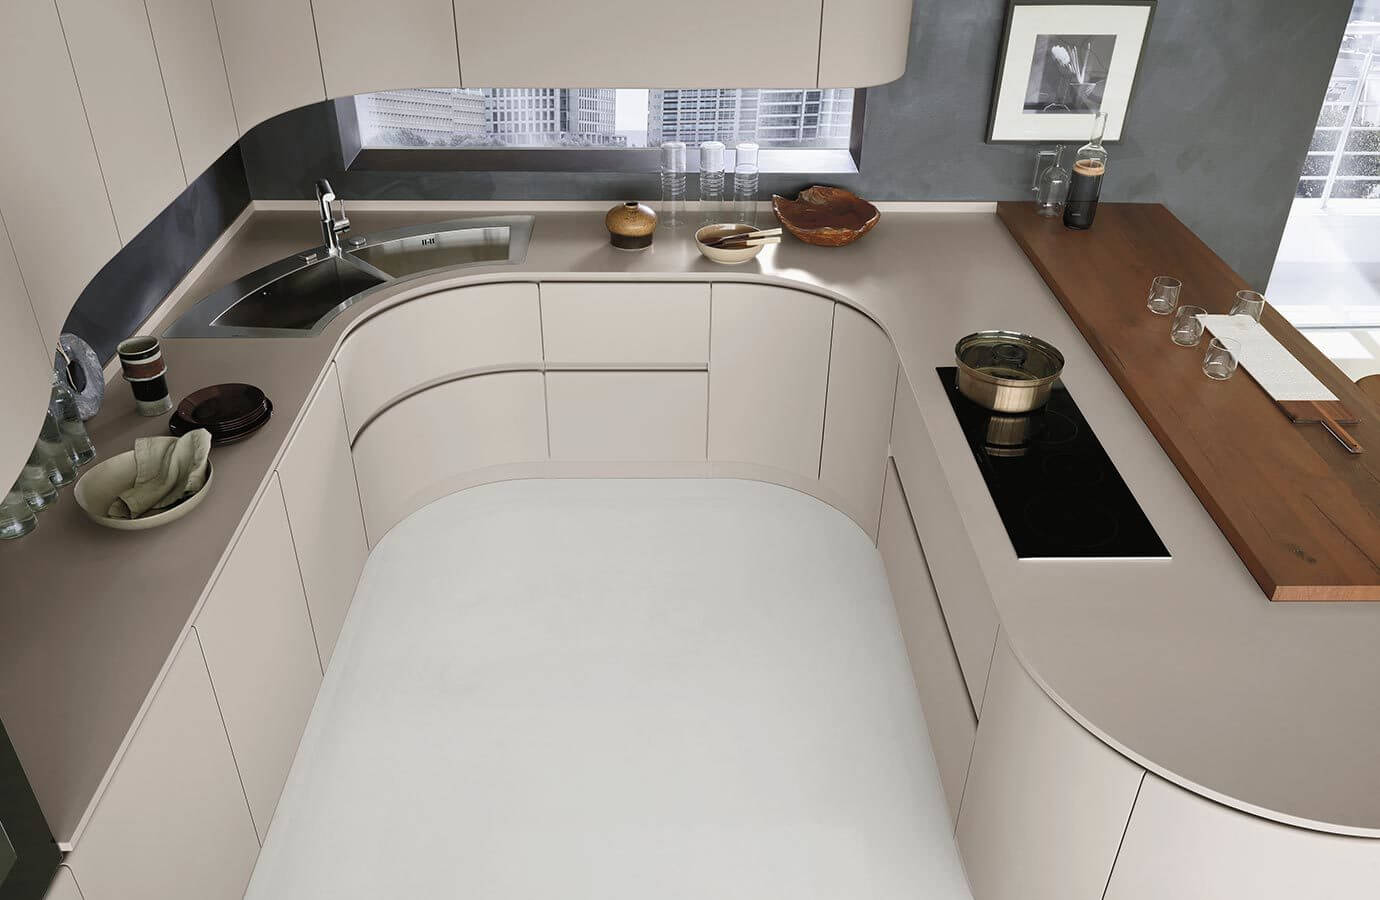 Guide for Selecting a Kitchen Sink